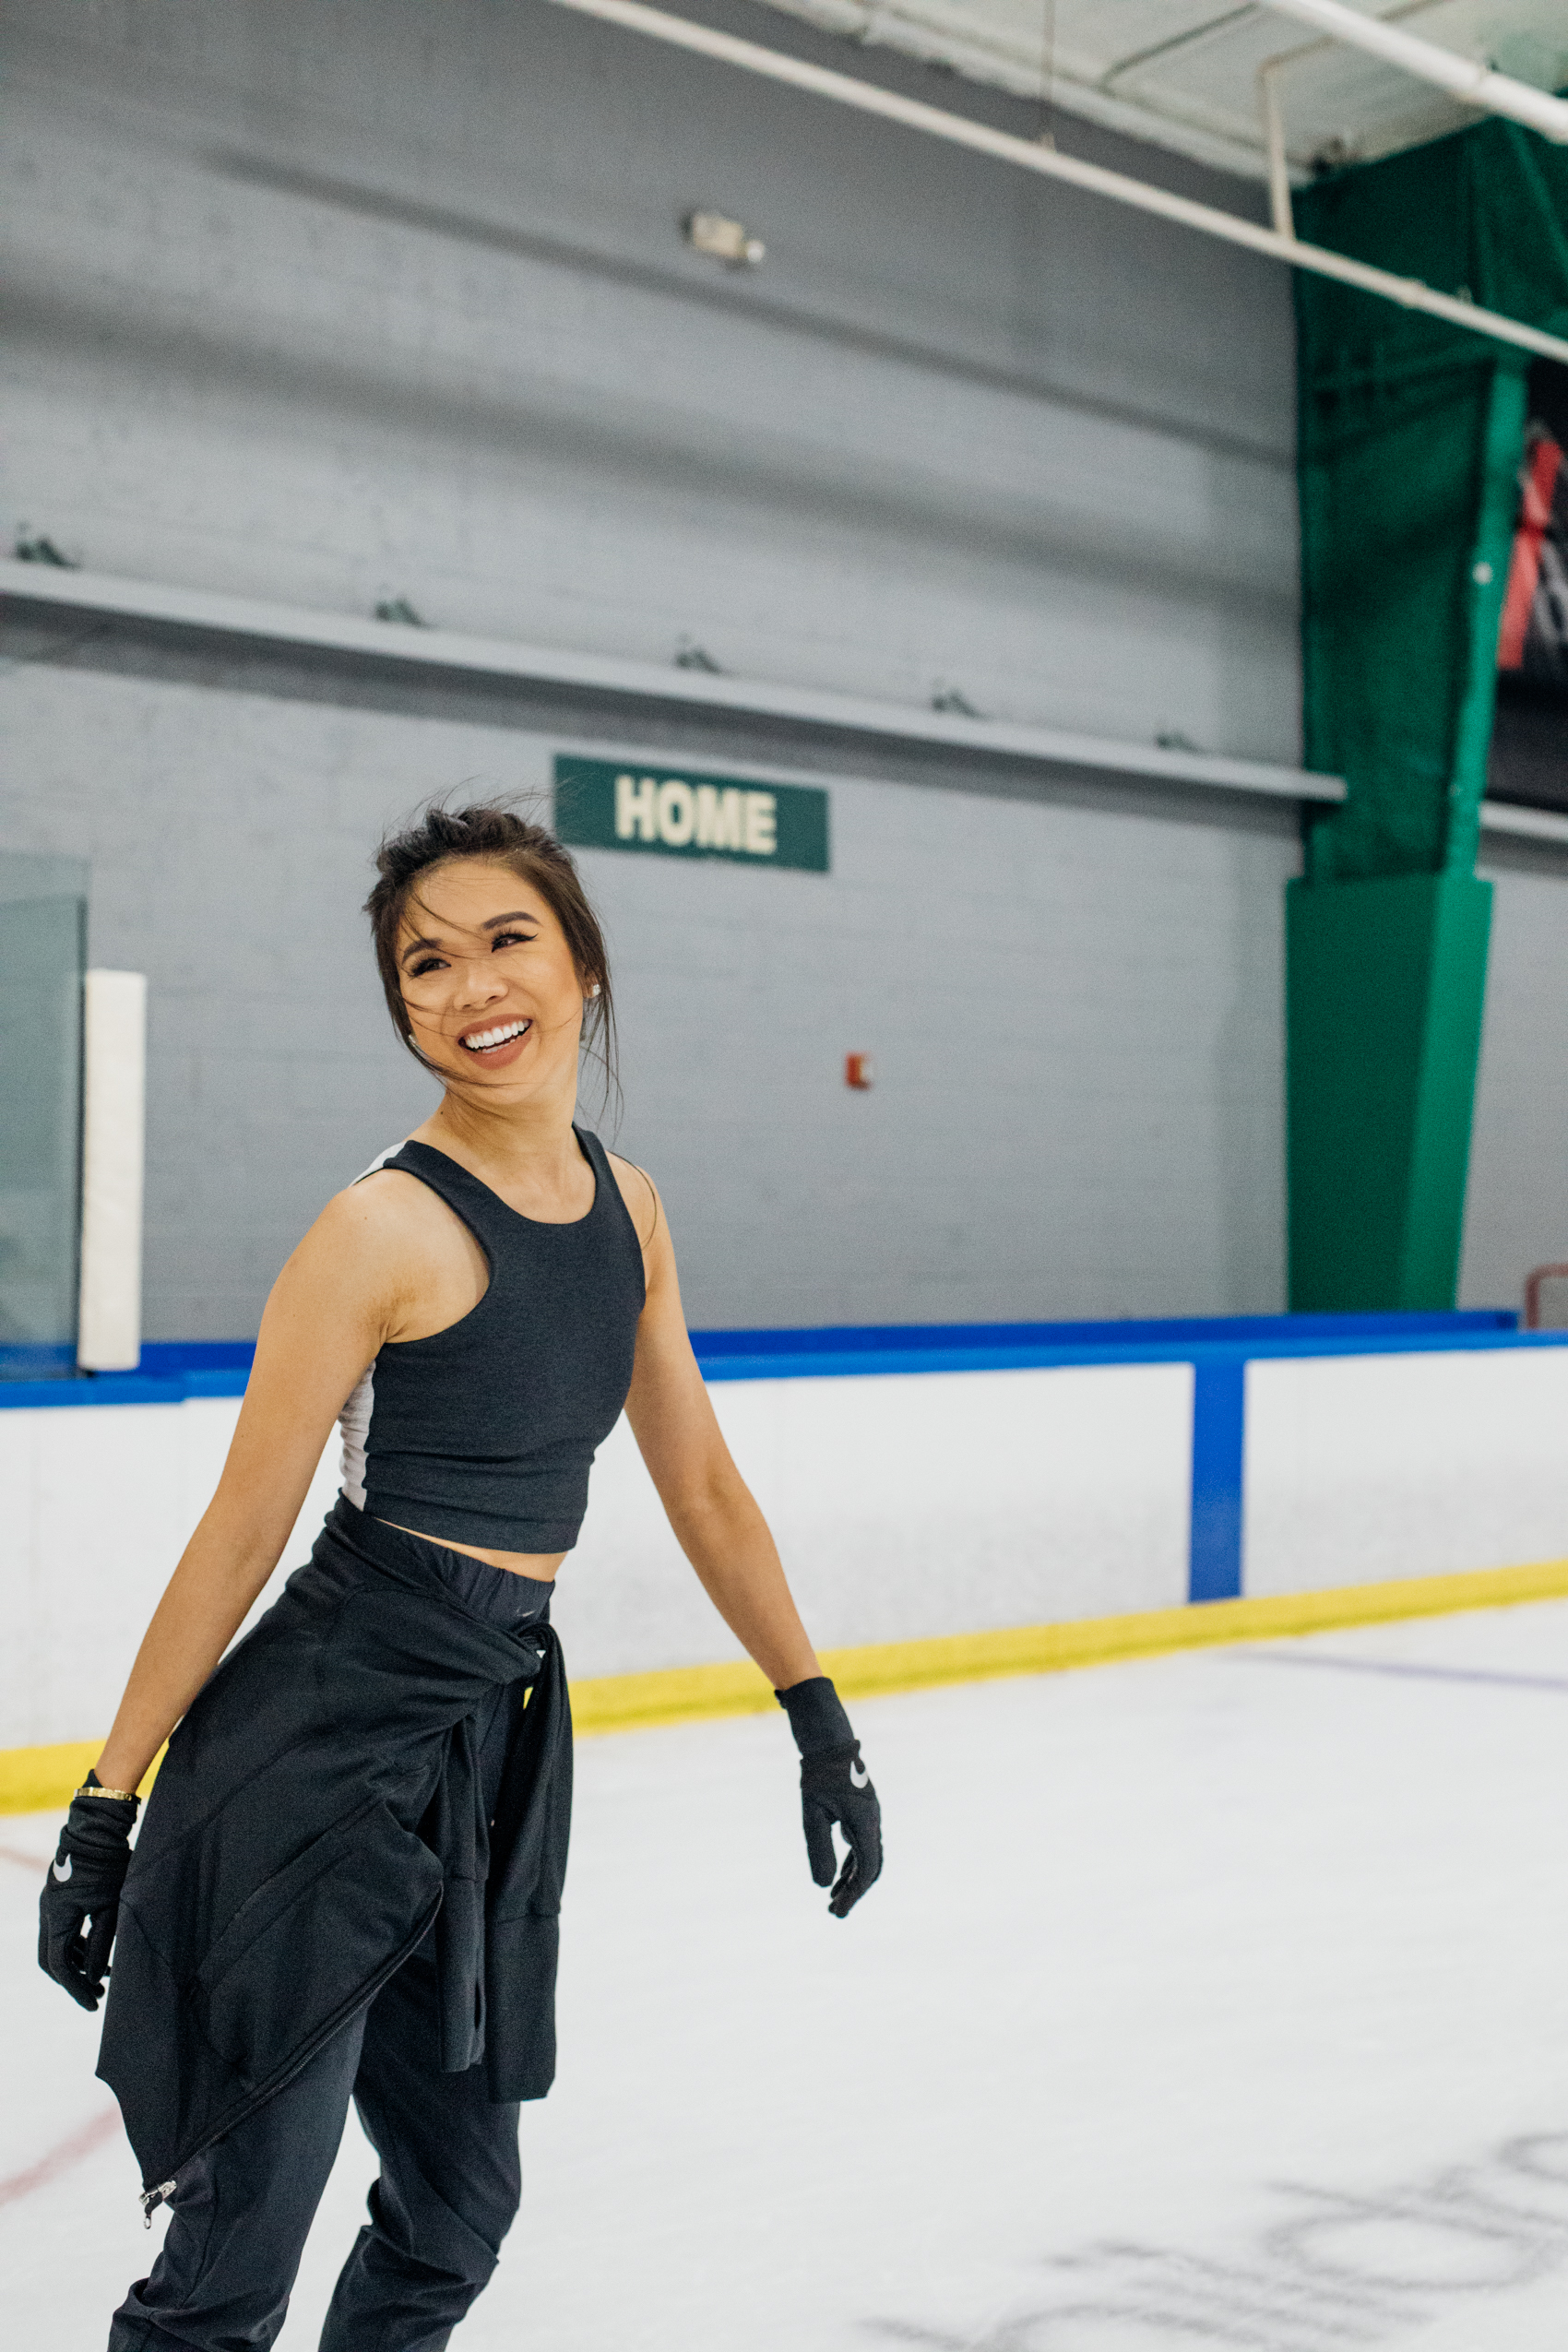 How to succeed at ice skating lessons